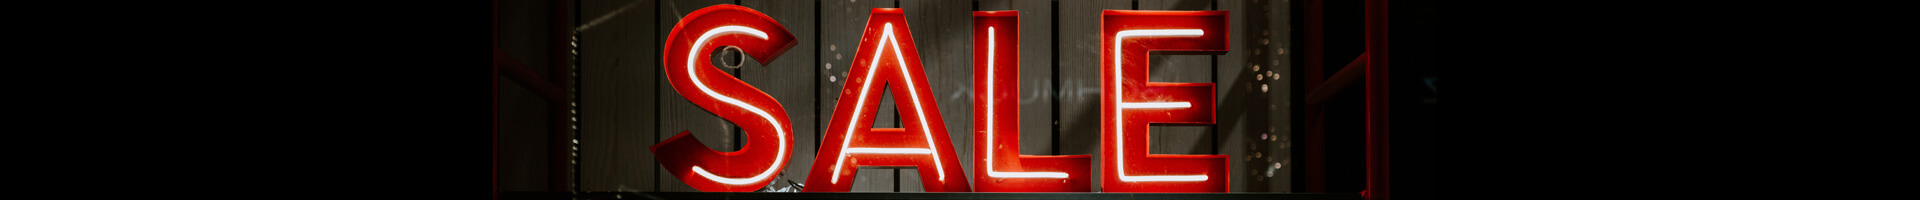 Large neon sign with the red lettering SALE